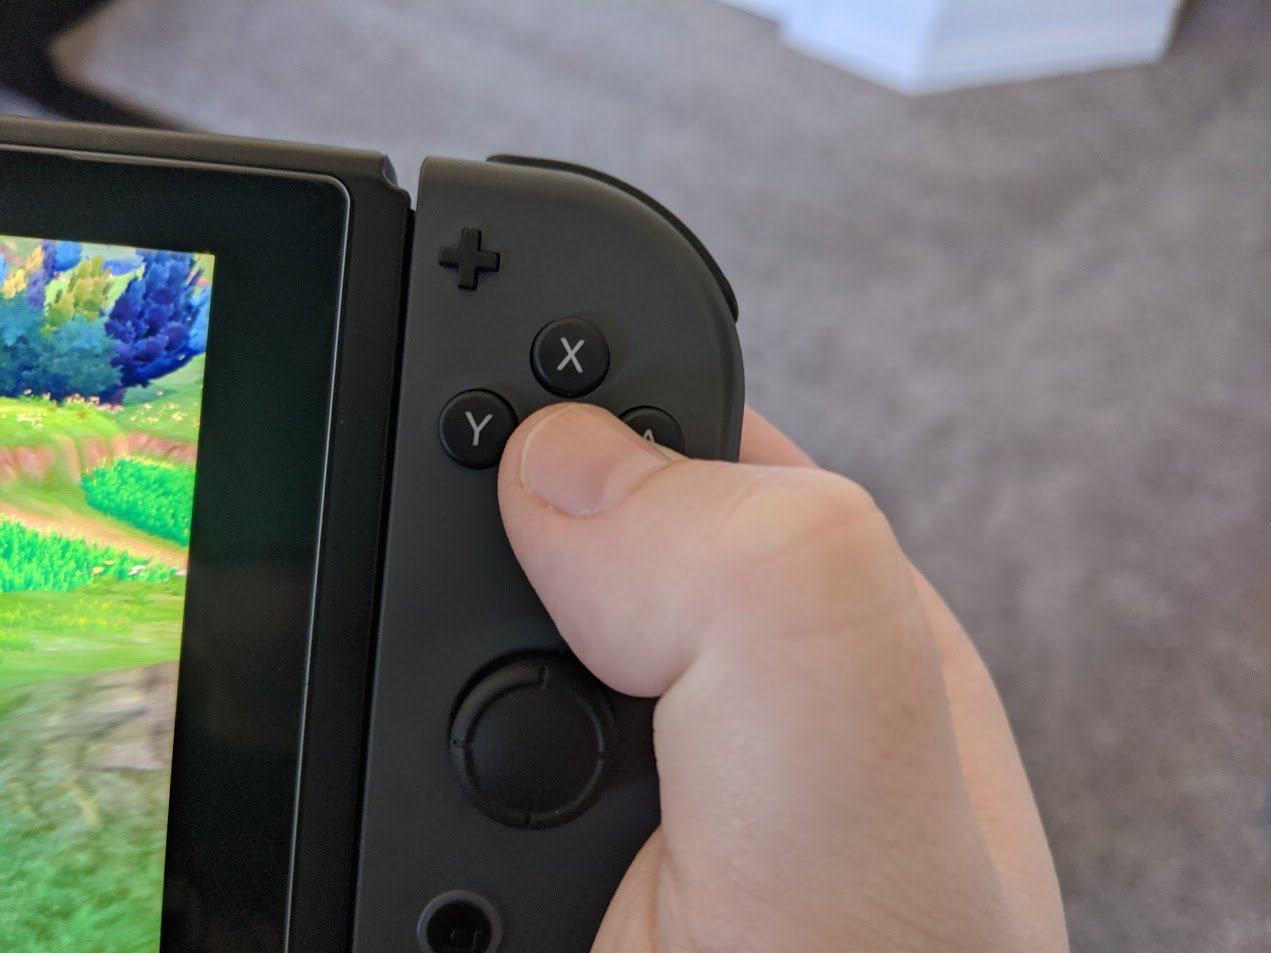 How to know if your Pokémon has Pokérus in Sword and Shield on the Switch by showing: Pressing Y Pokemon Sword and Shield